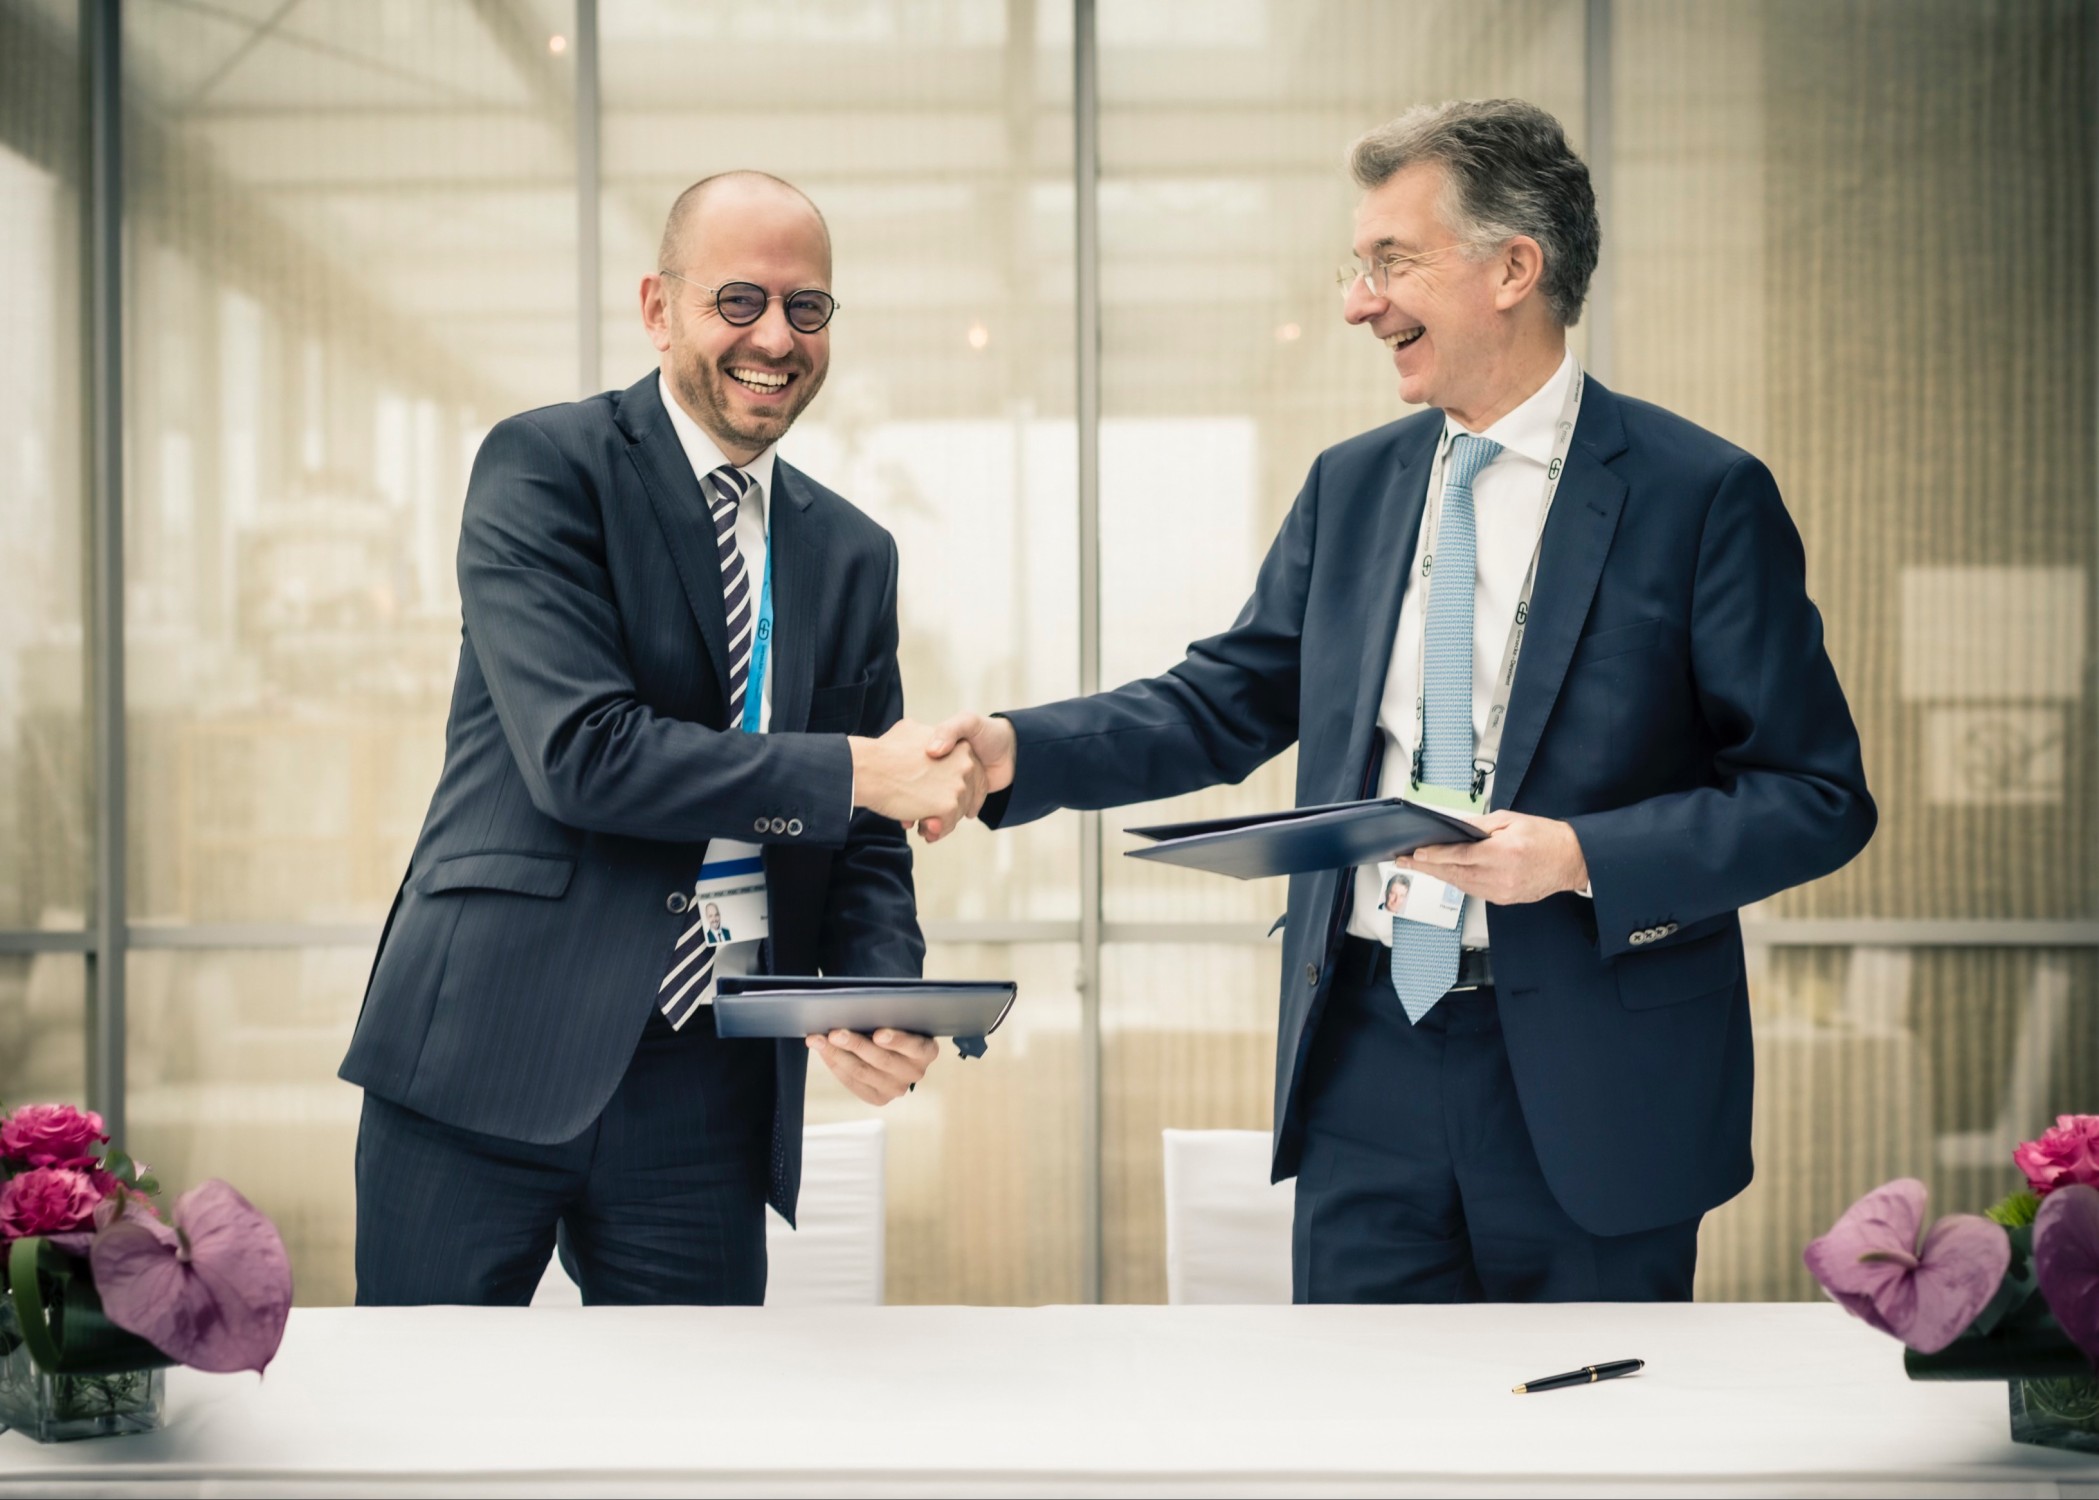 Representatives of Munich Security Conference and Siemens Energy sign the renewed contract.